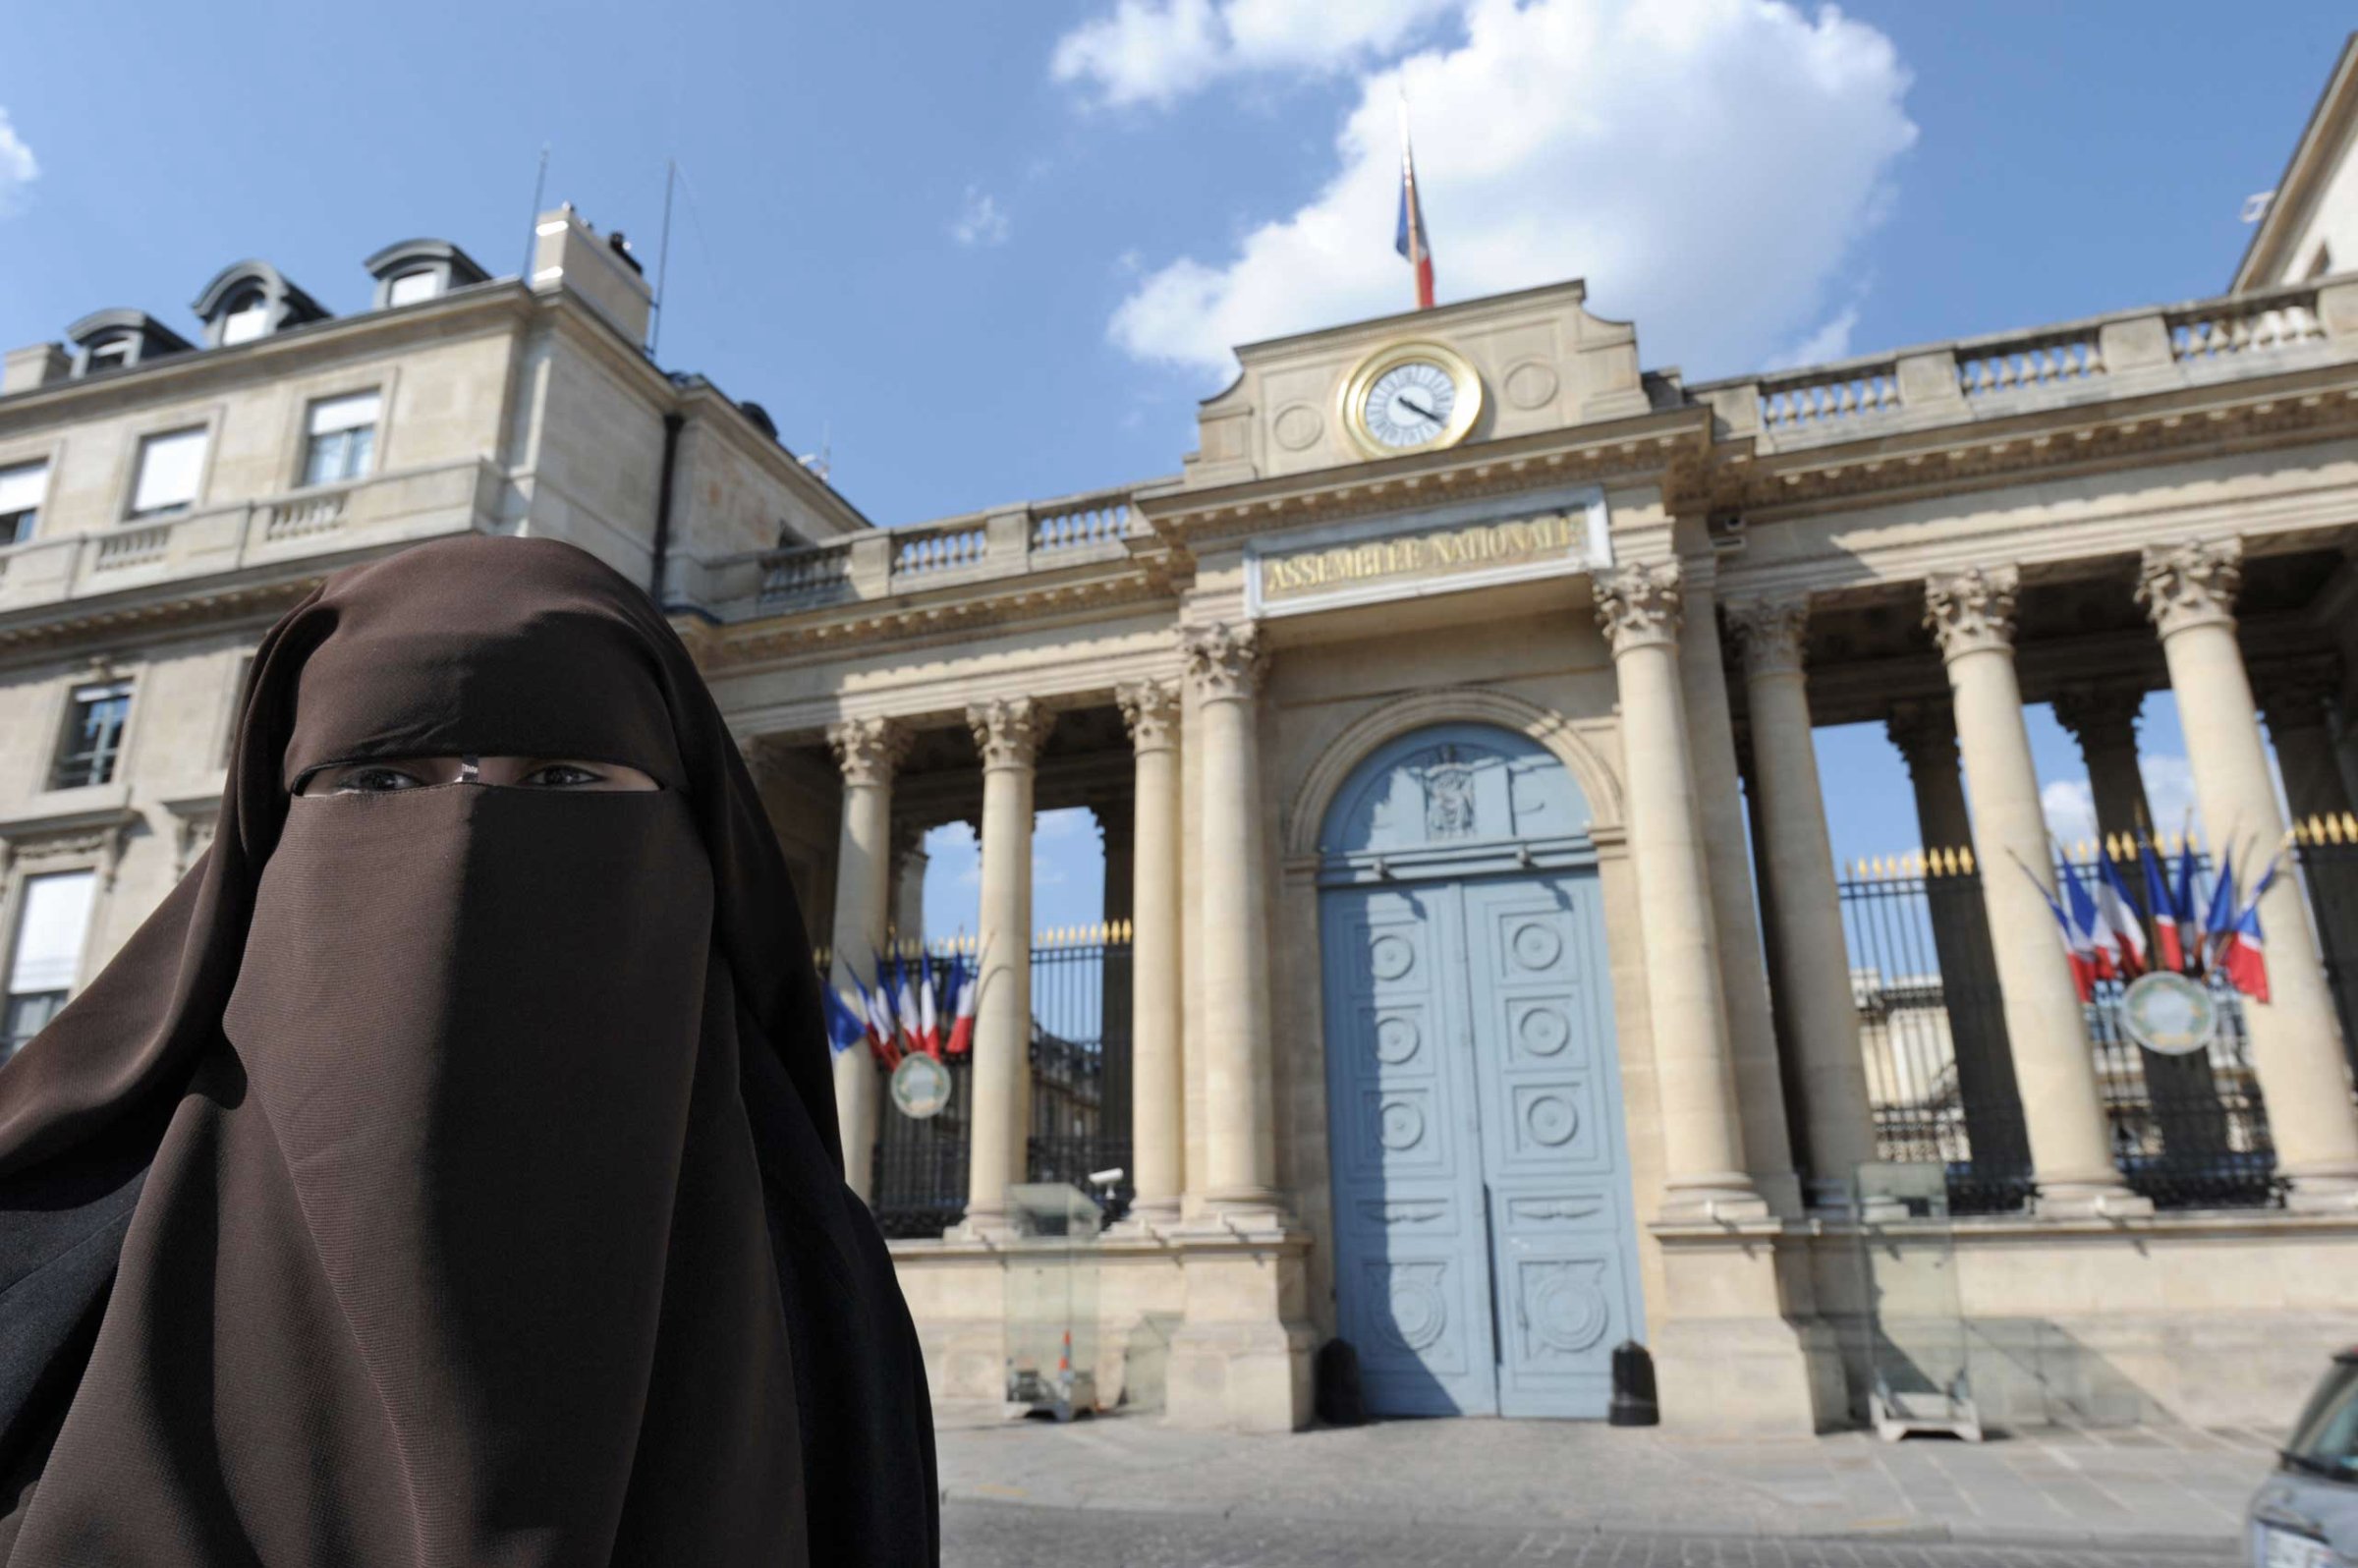 A Niqab veiled woman poses in front of the French National Assembly to protest against France's ban on wearing full-face niqab veils in public, in Paris in 2011.